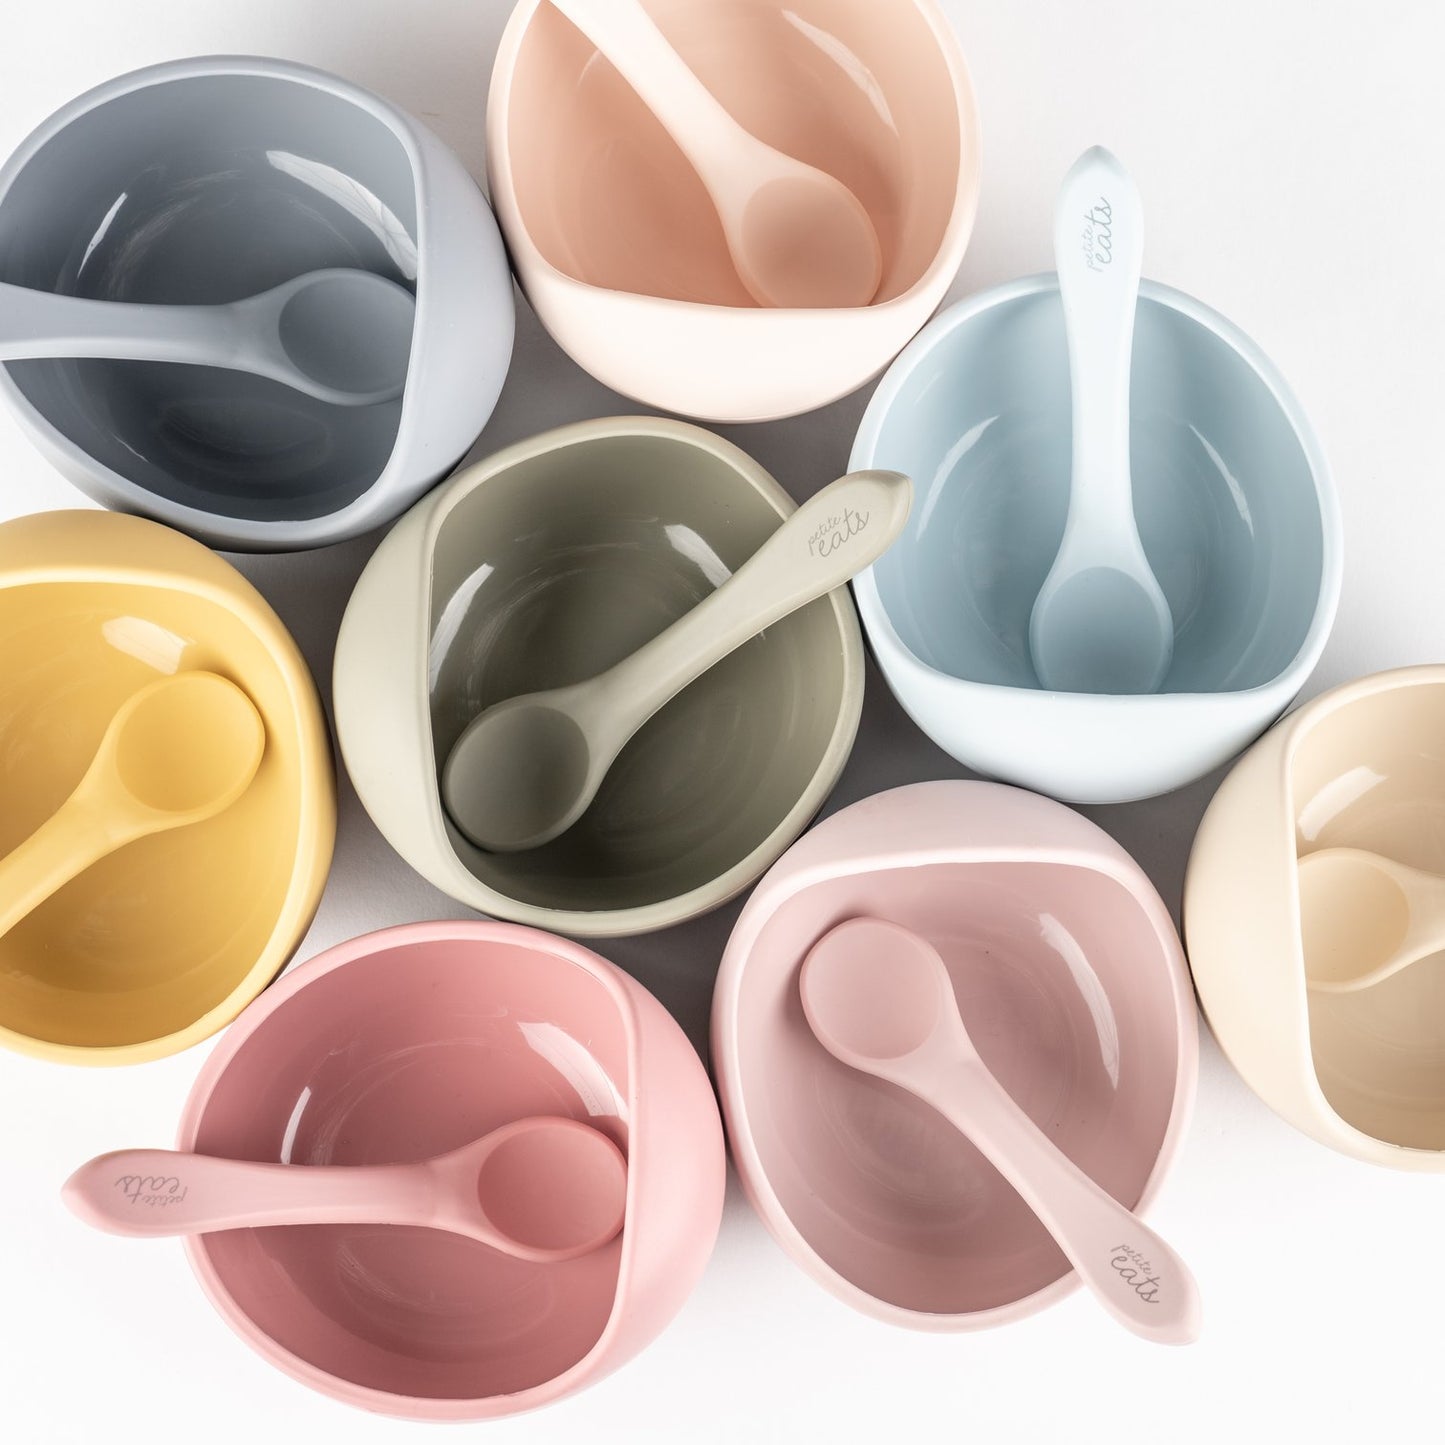 Petite Eats Silicone Bowl and Spoon Sand